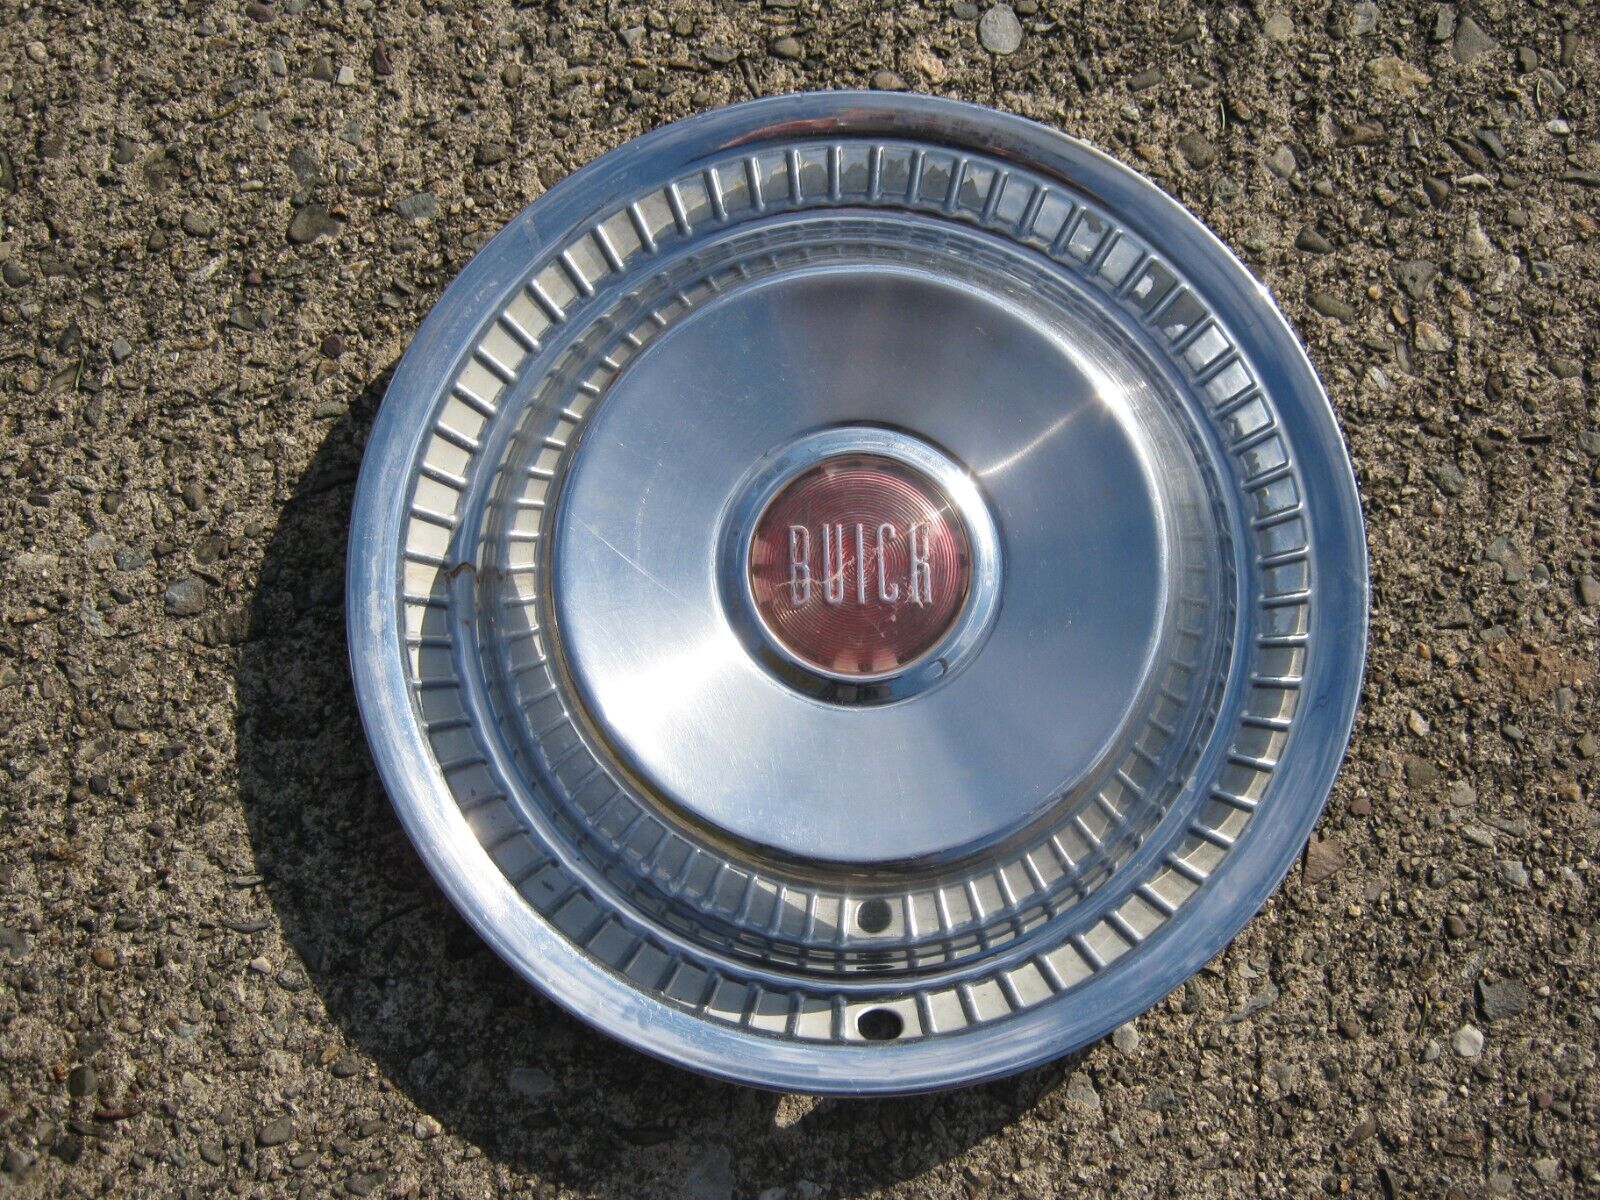 One factory 1956 Buick LeSabre Electra Invicta 15 inch hubcap wheel cover